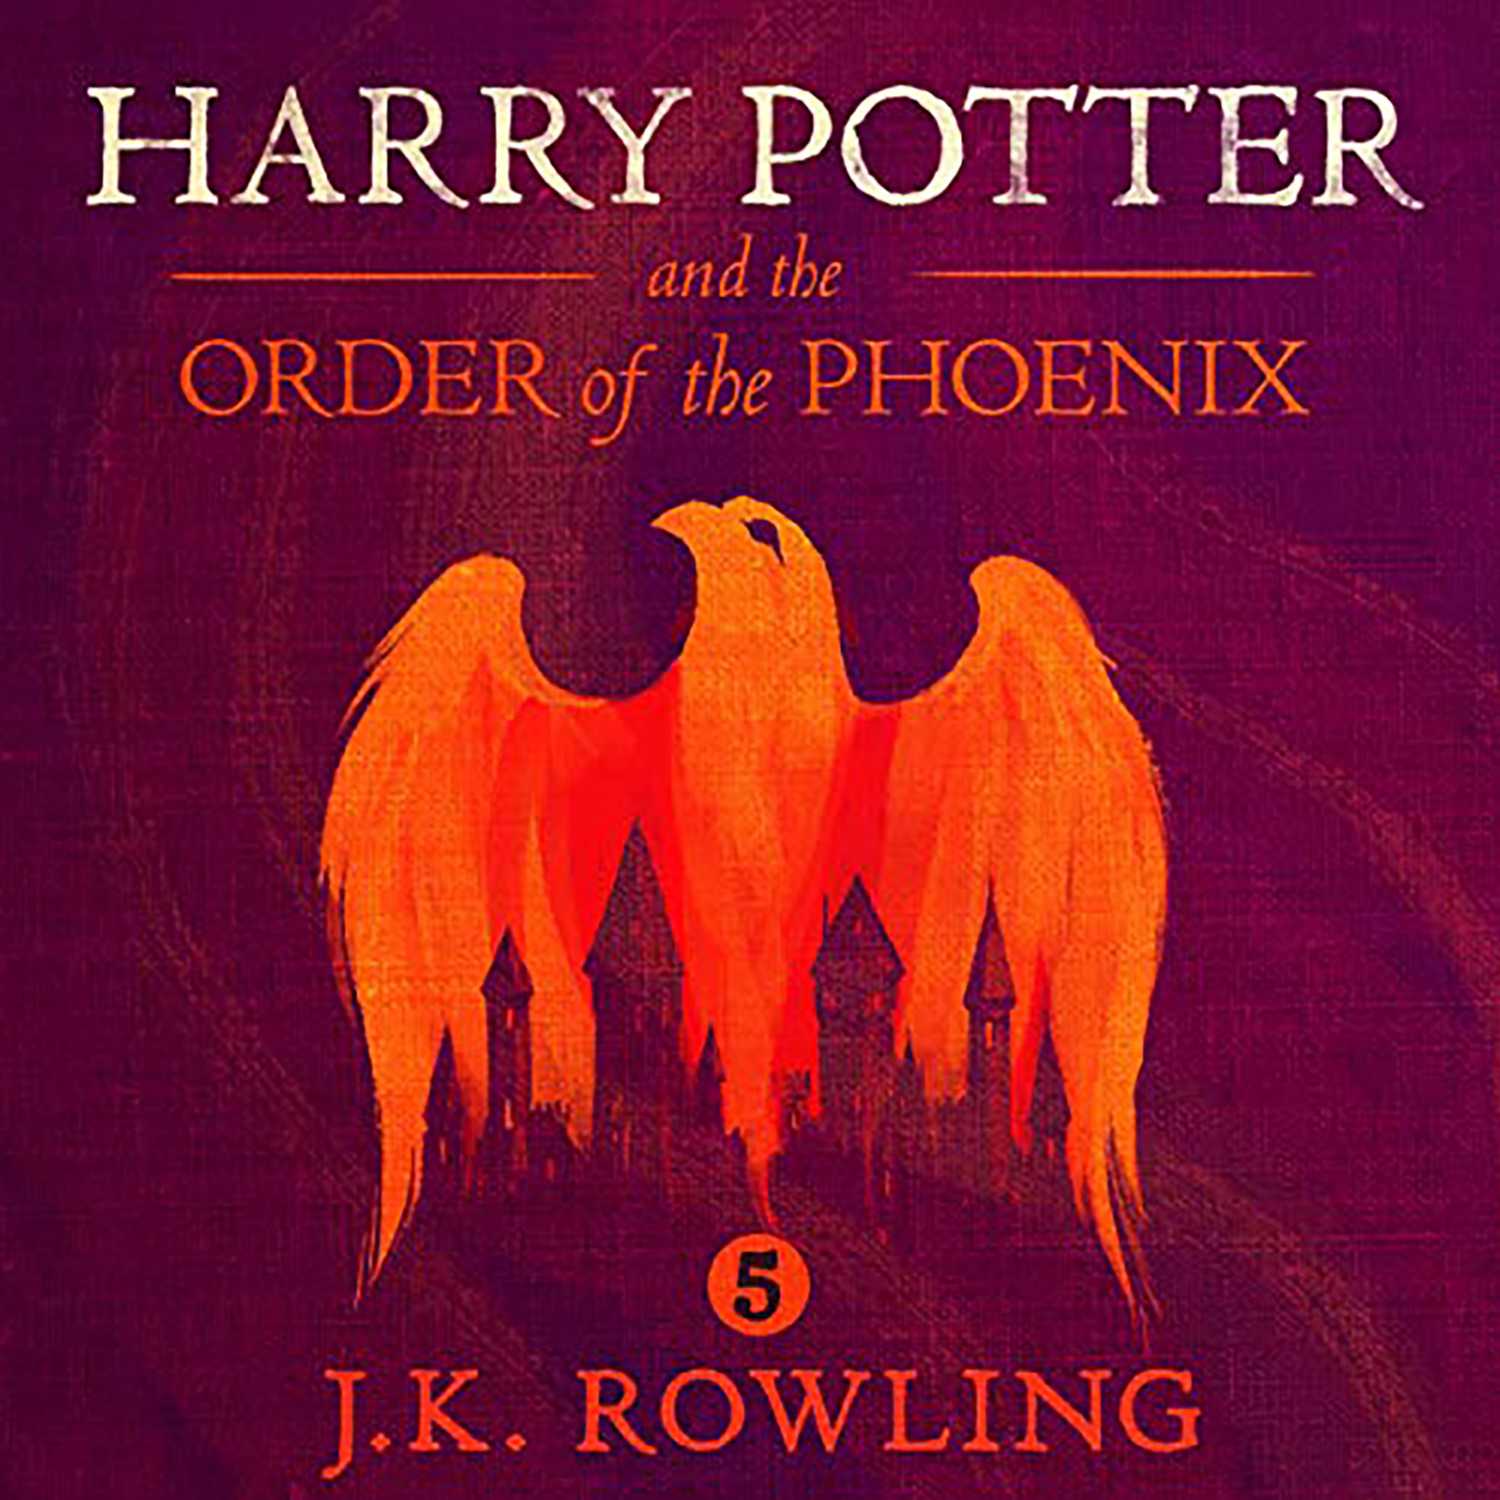 Harry Potter and the Order of the Phoenix Part 3